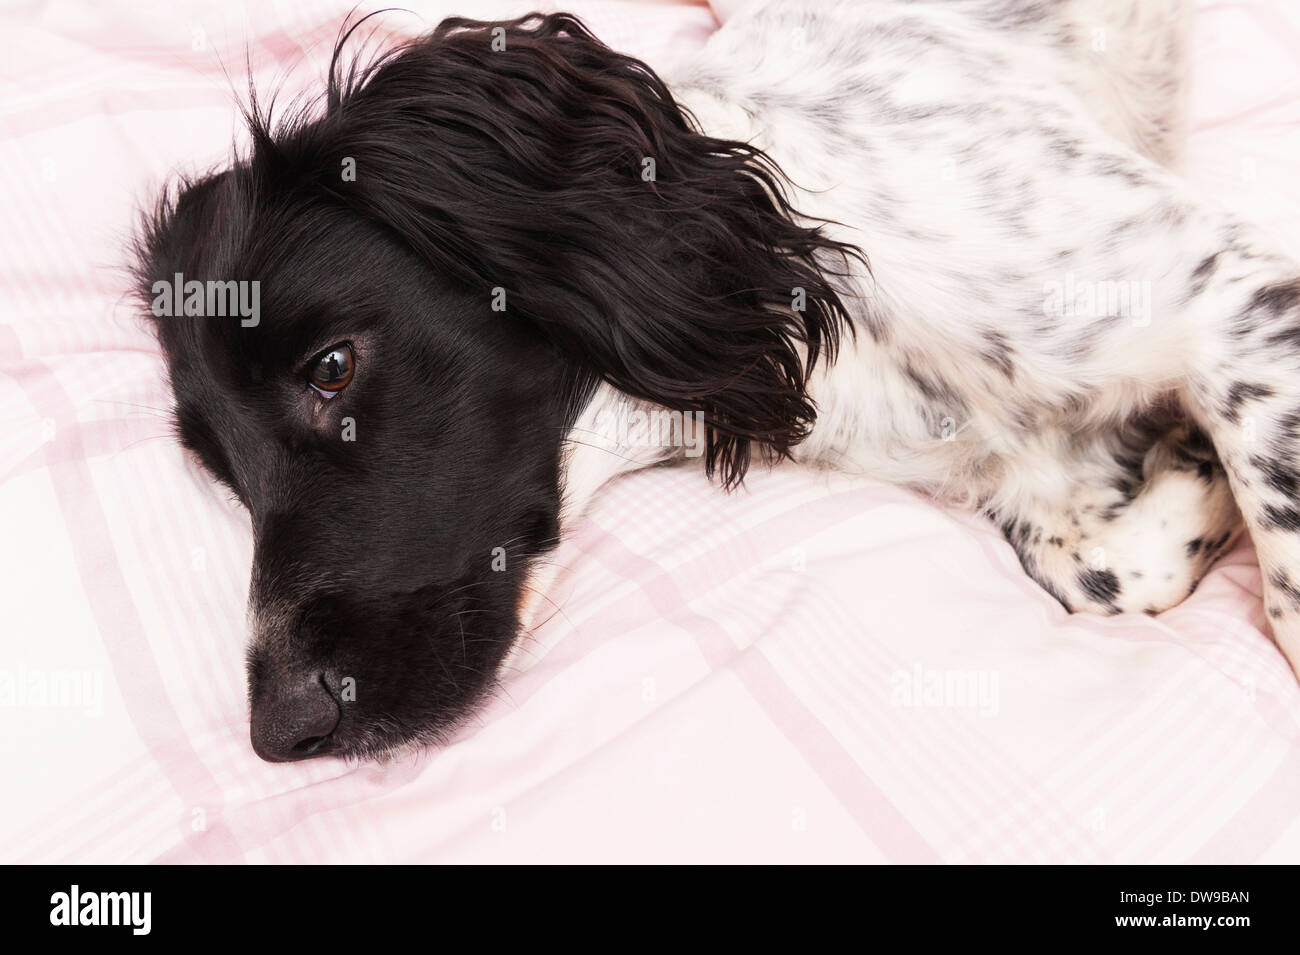 A black and white English Springer Spaniel indoors on a bed Stock Photo